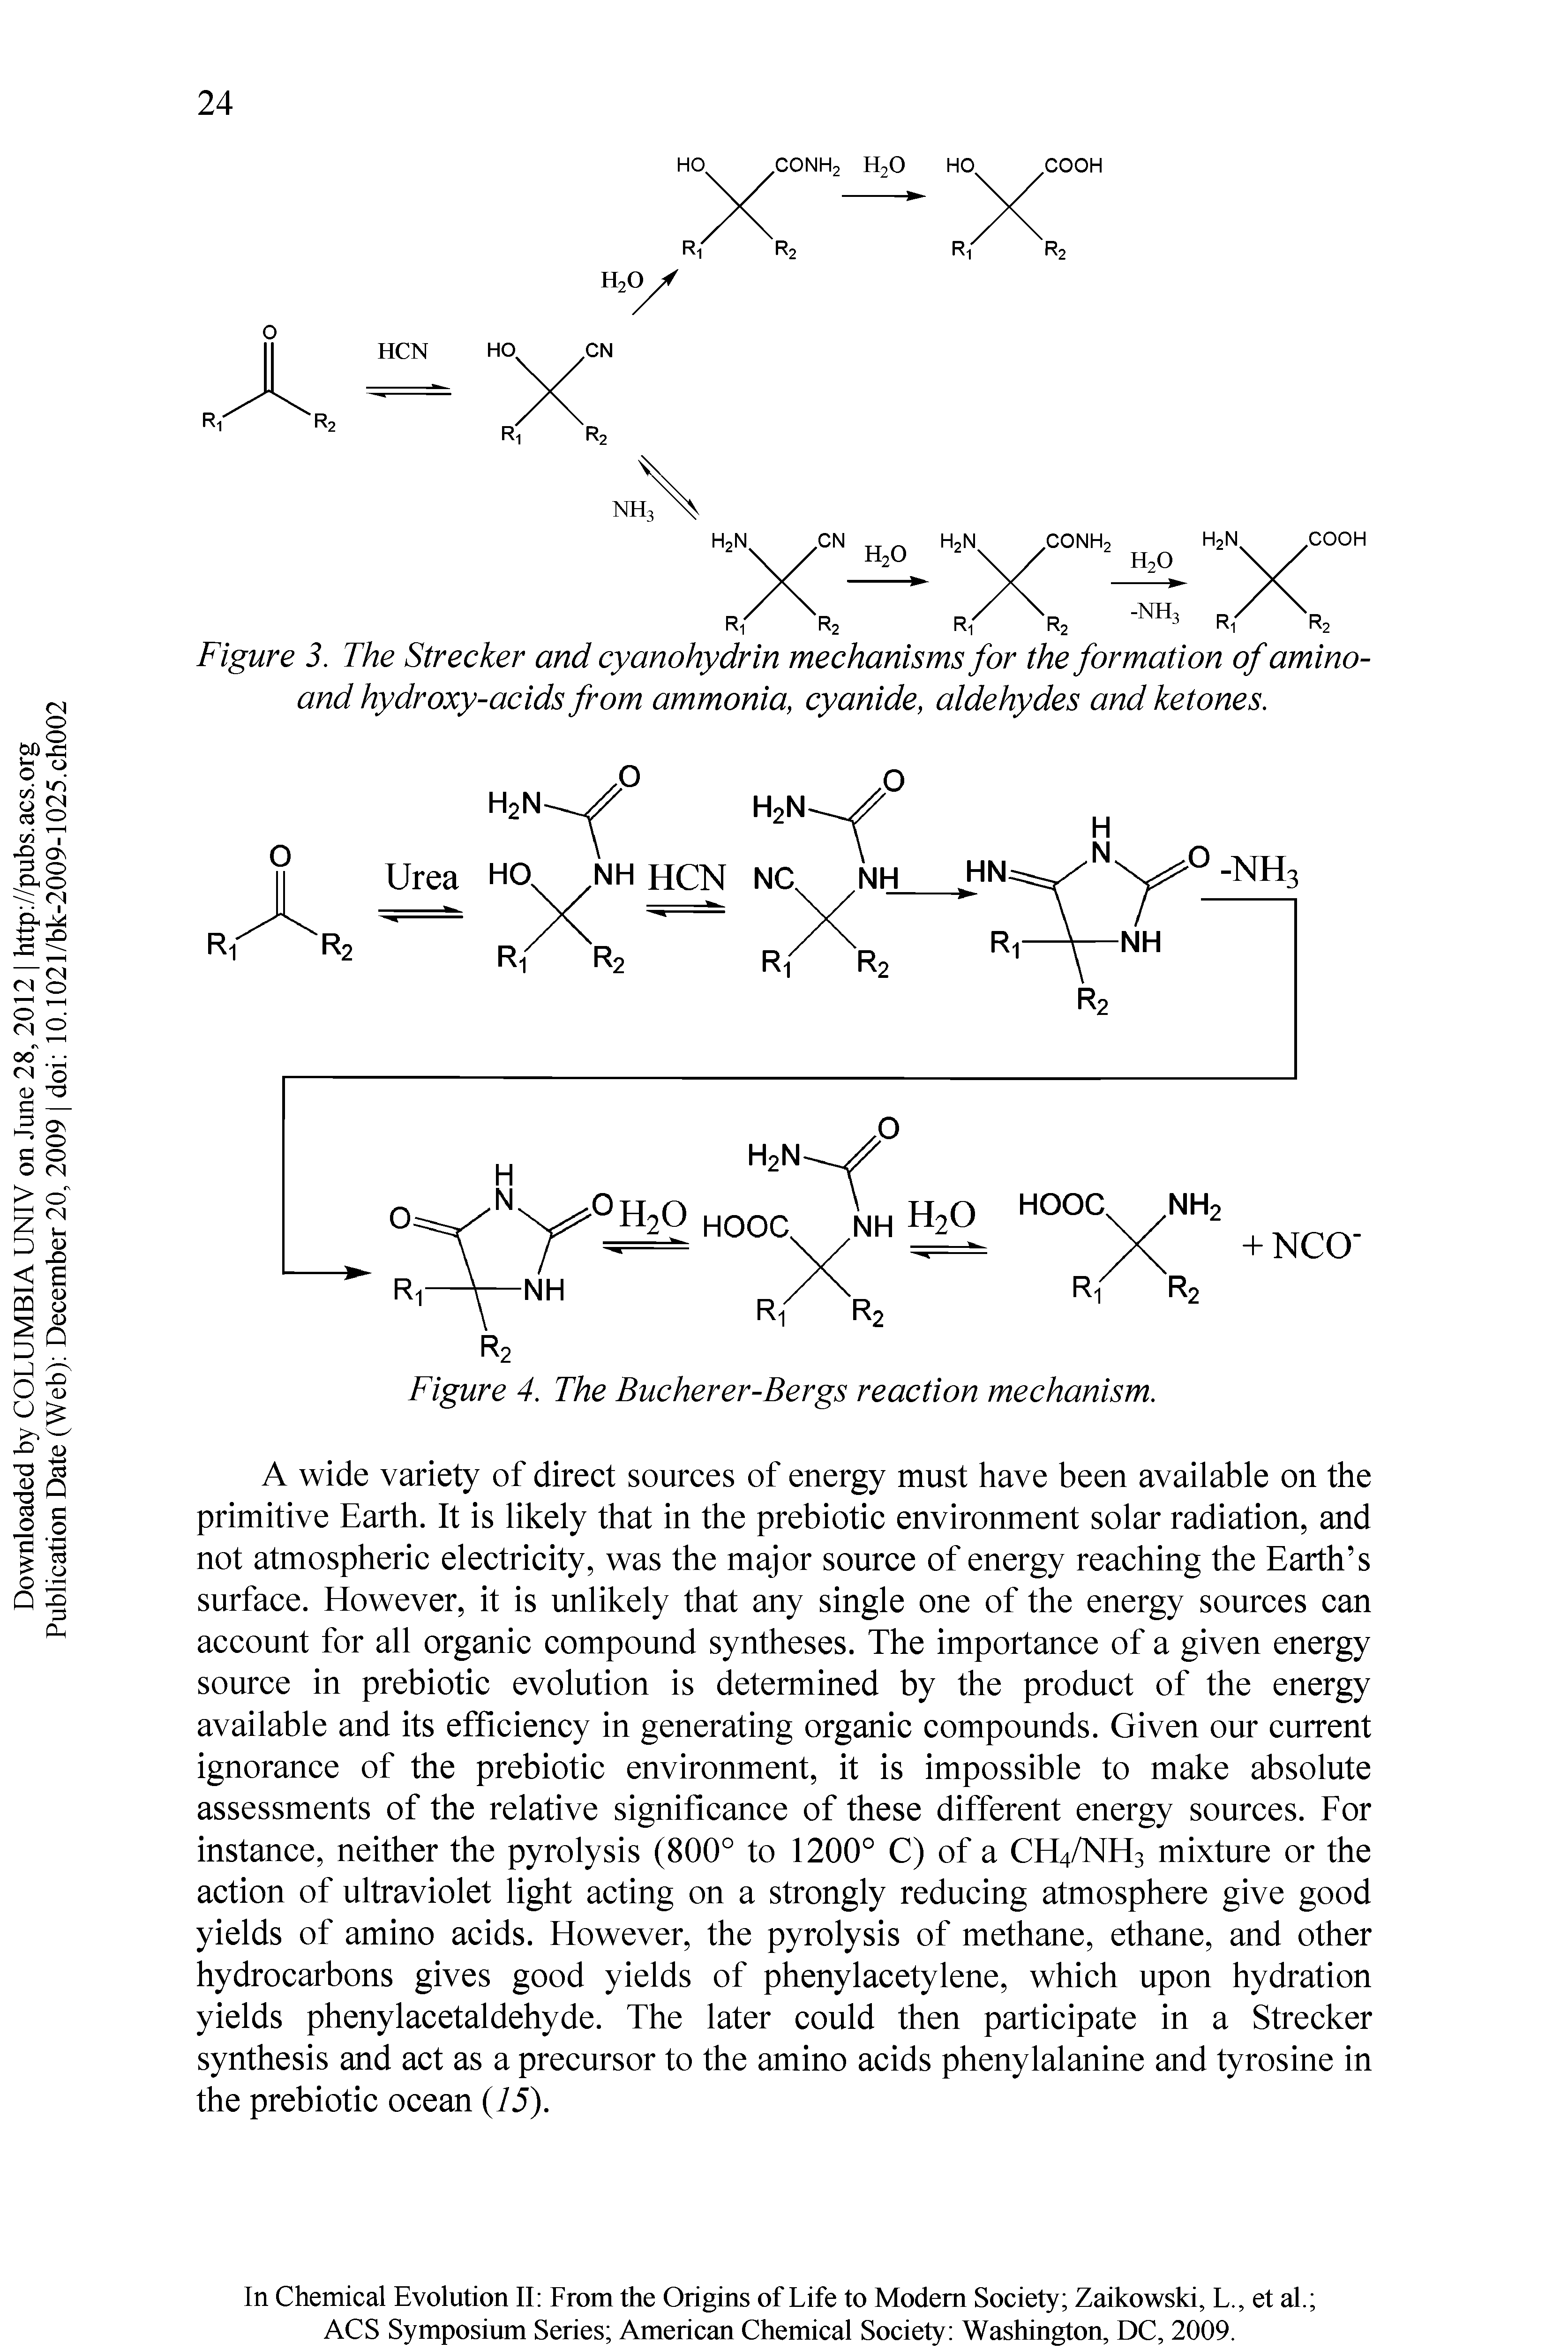 Figure 3. The Strecker and cyanohydrin mechanisms for the formation of amino-and hydroxy-acids from ammonia, cyanide, aldehydes and ketones.